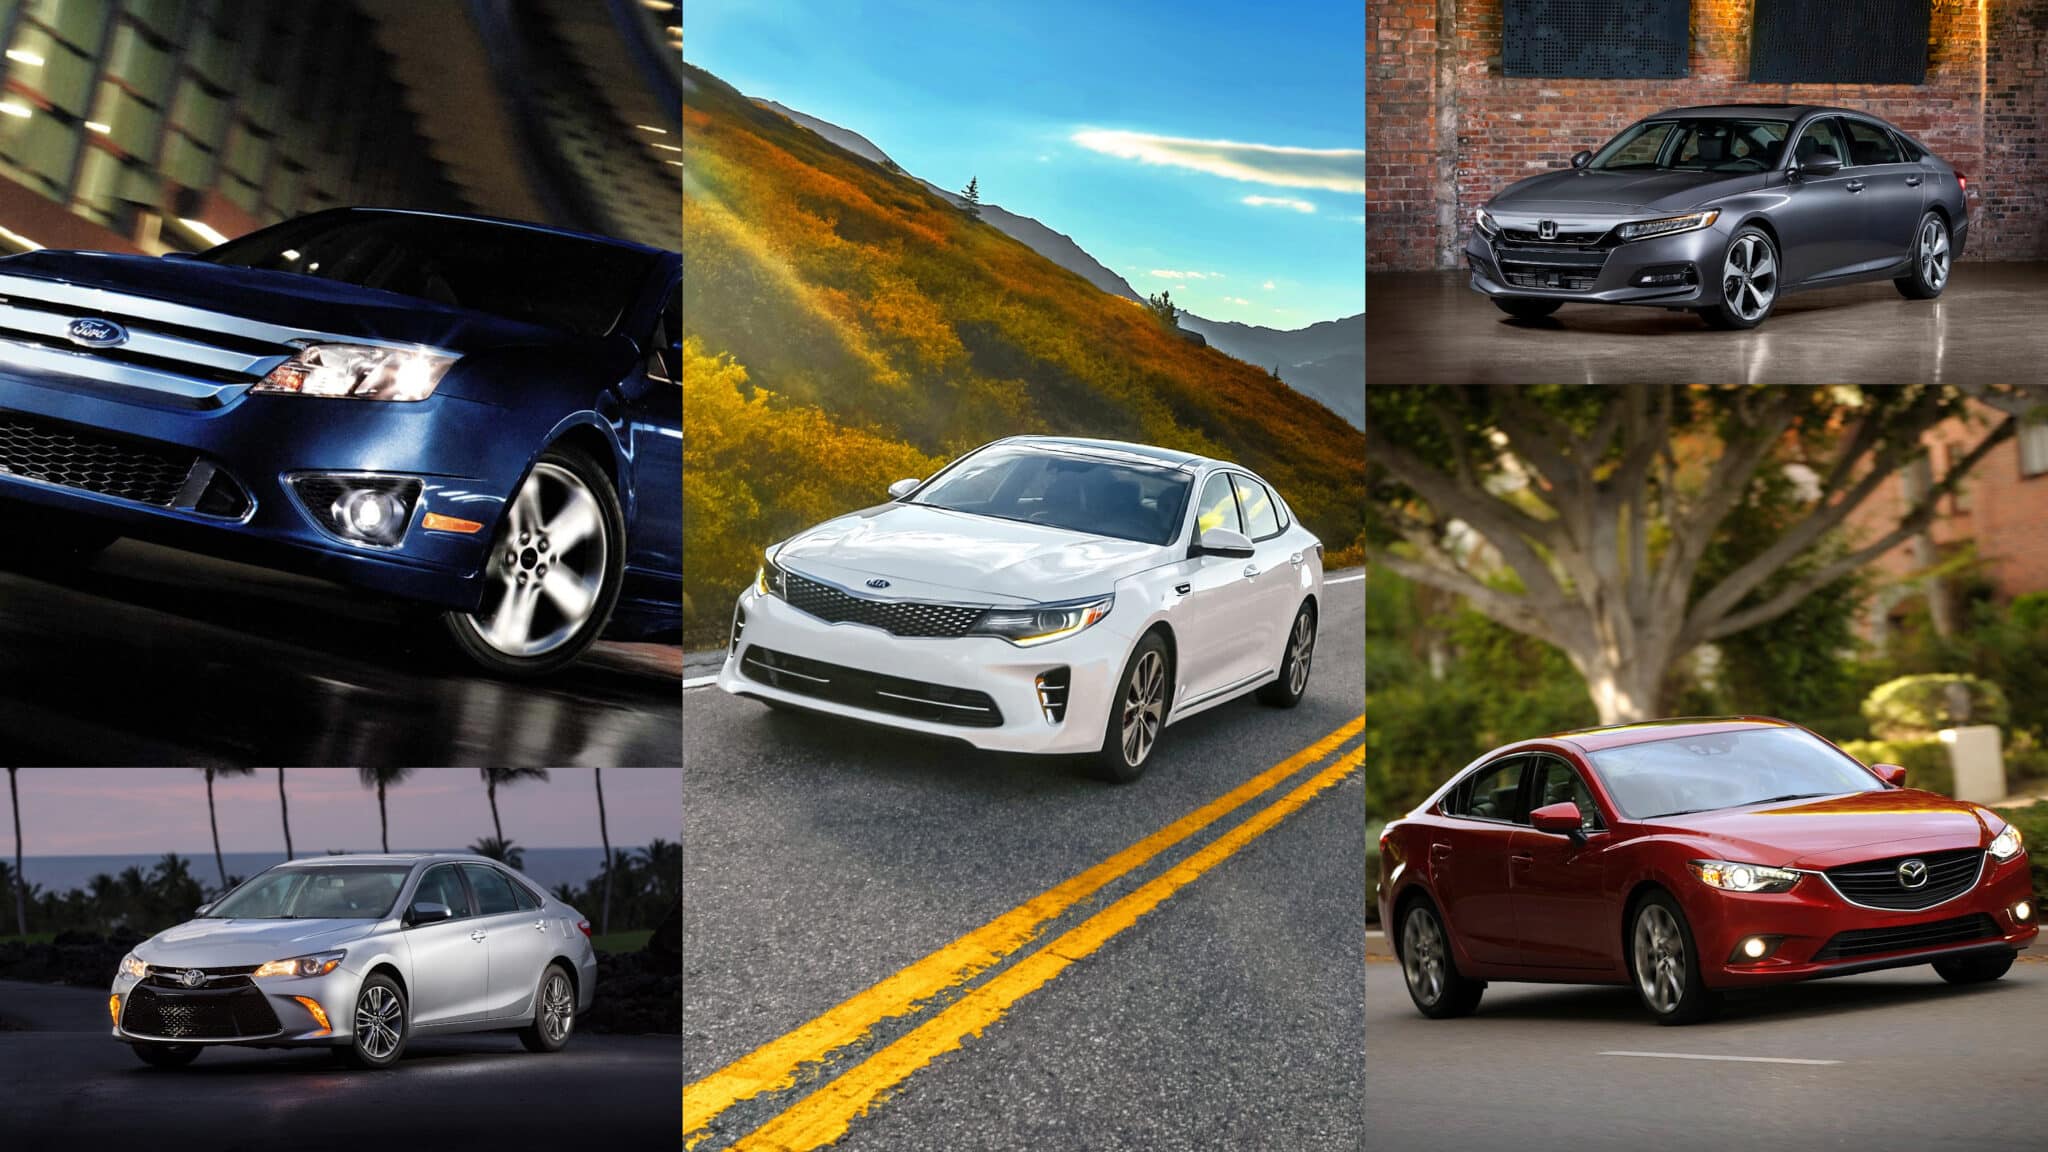 Used Ford Fusion buyer's guide